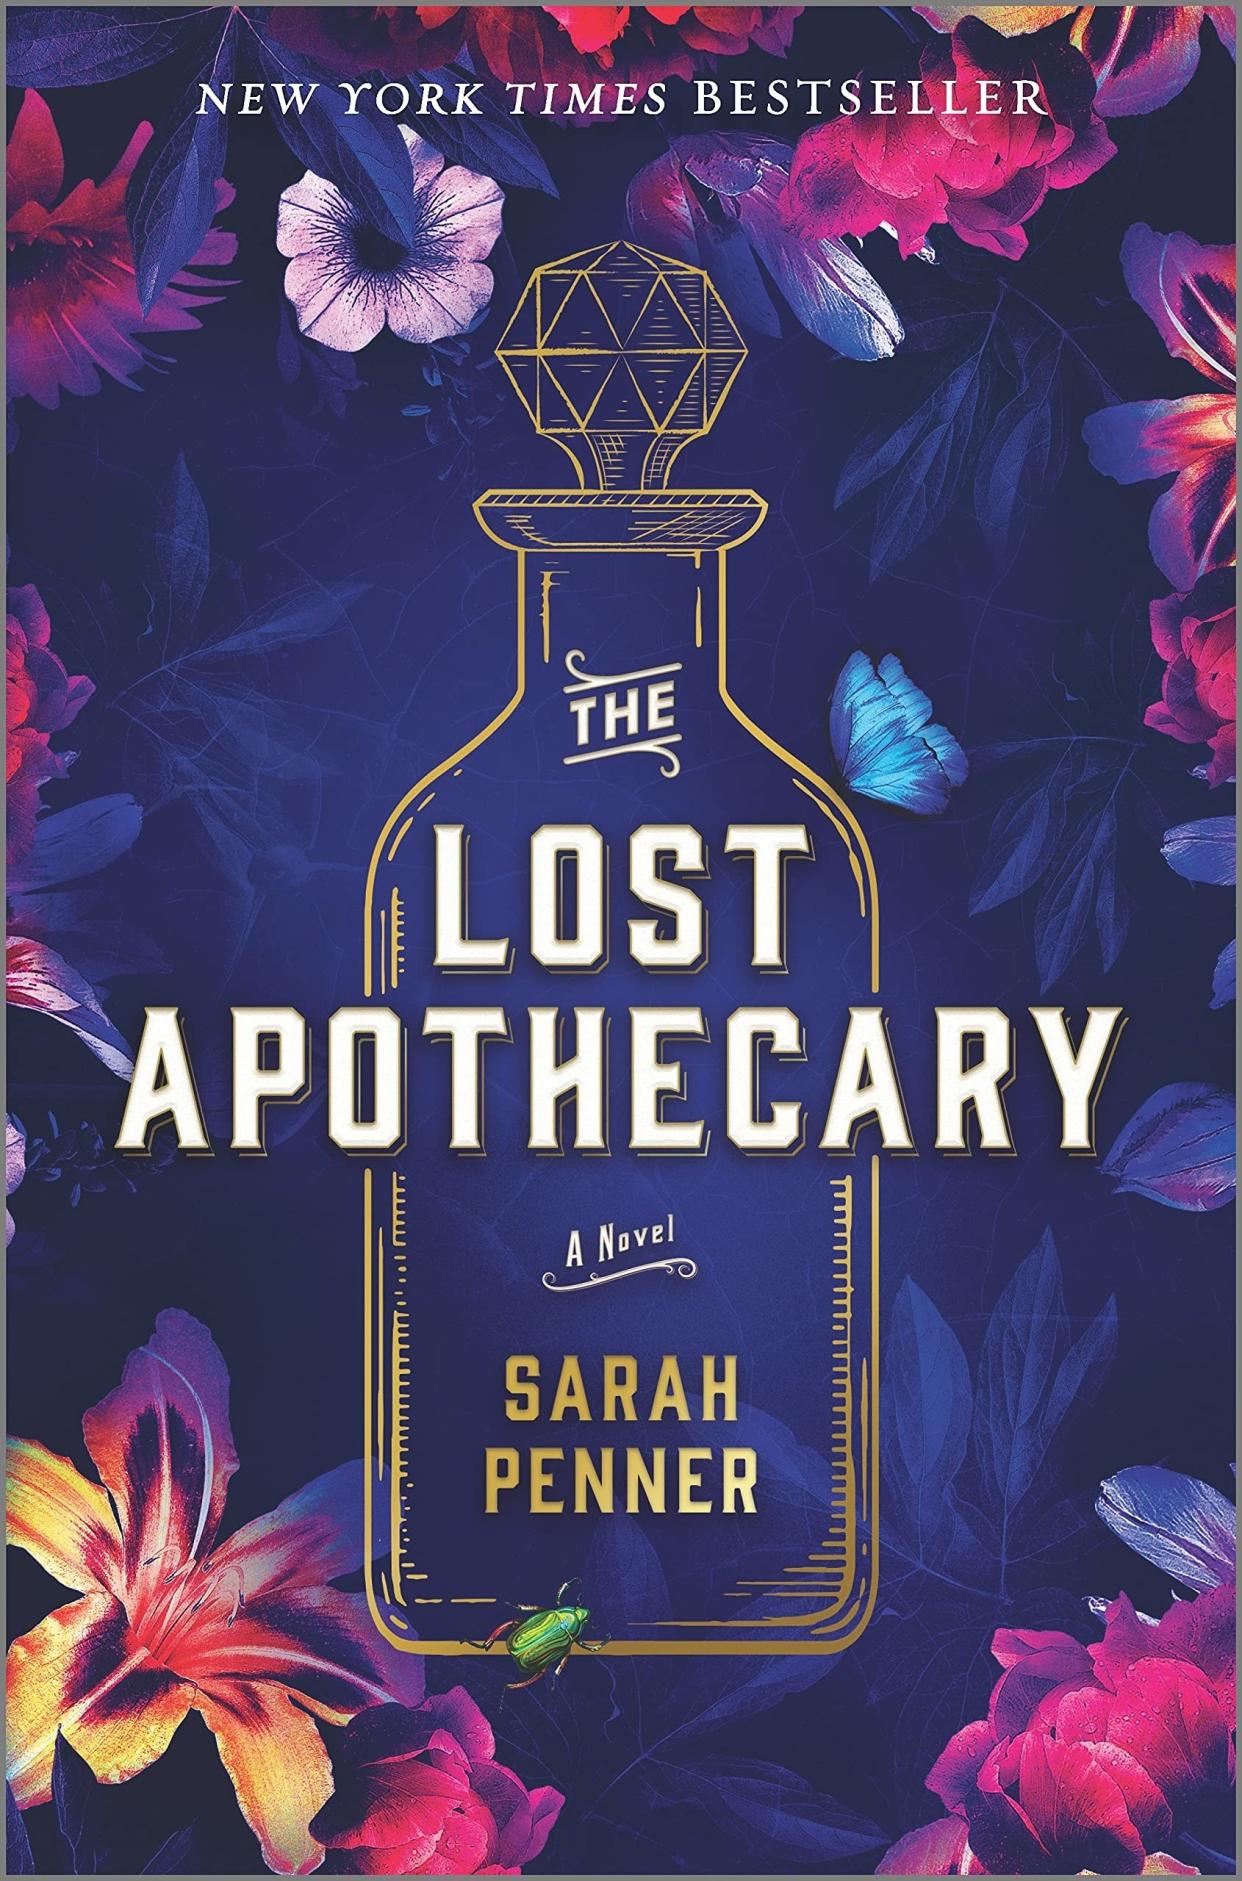 Book cover of "The Lost Apothecary: